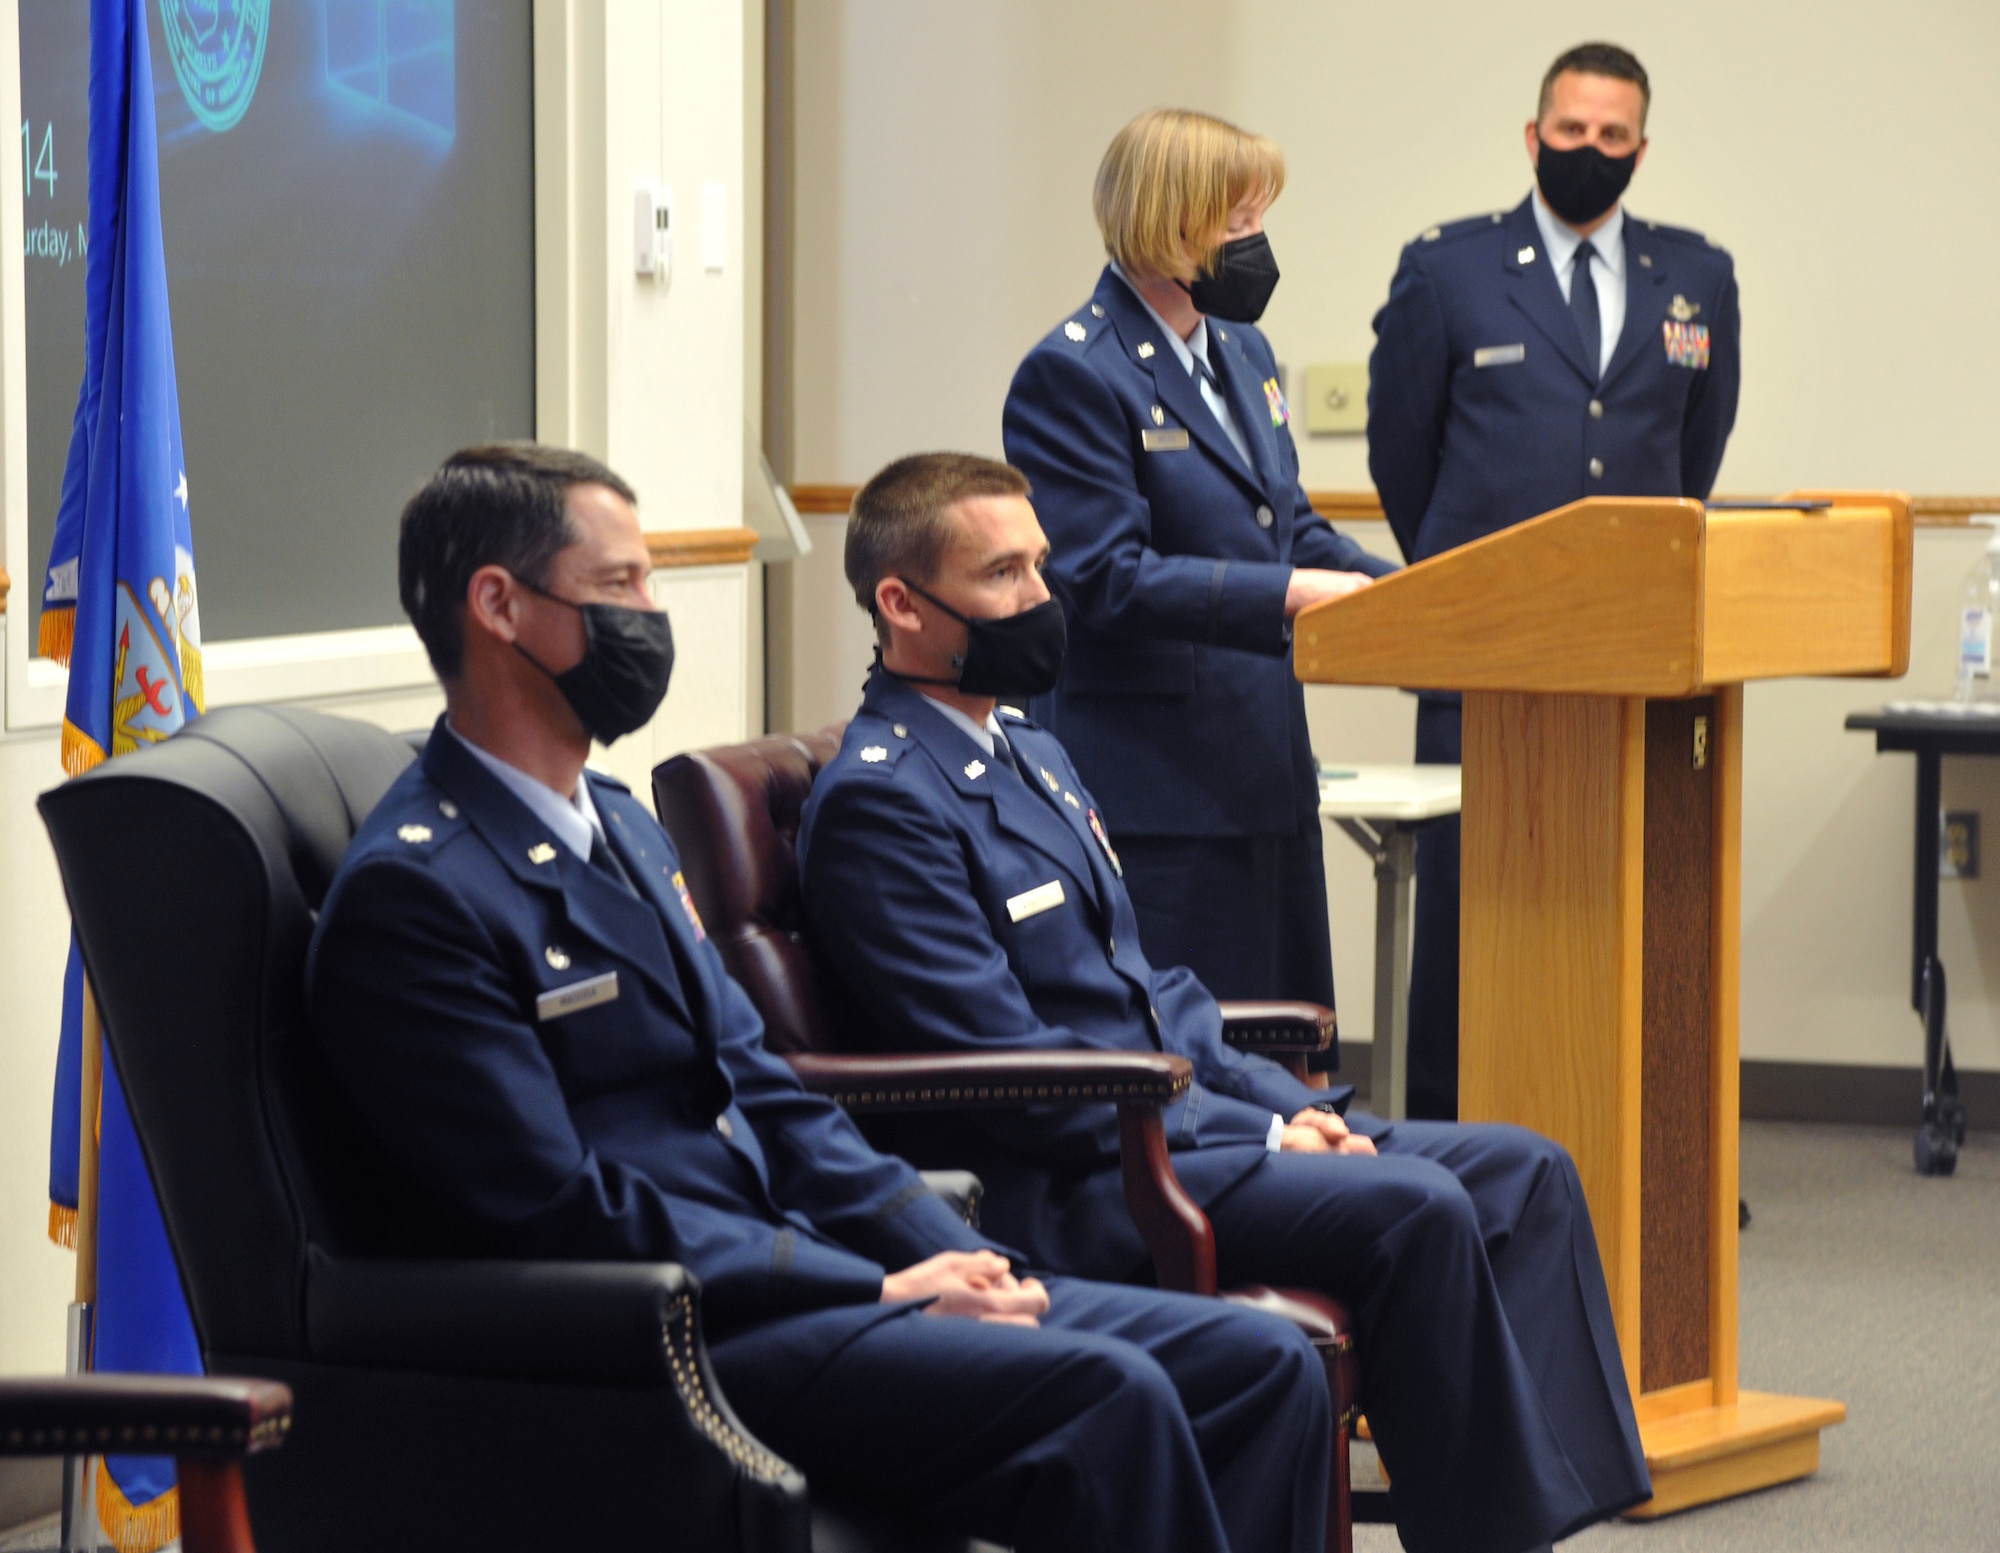 U.S. Air Force Lt. Col. Cynthia Welch, 446th Operations Group commander, officiates the 728th Airlift Squadron change of command March 6, 2021, on Joint Base Lewis-McChord, Washington, while outgoing and incoming commanders listen.